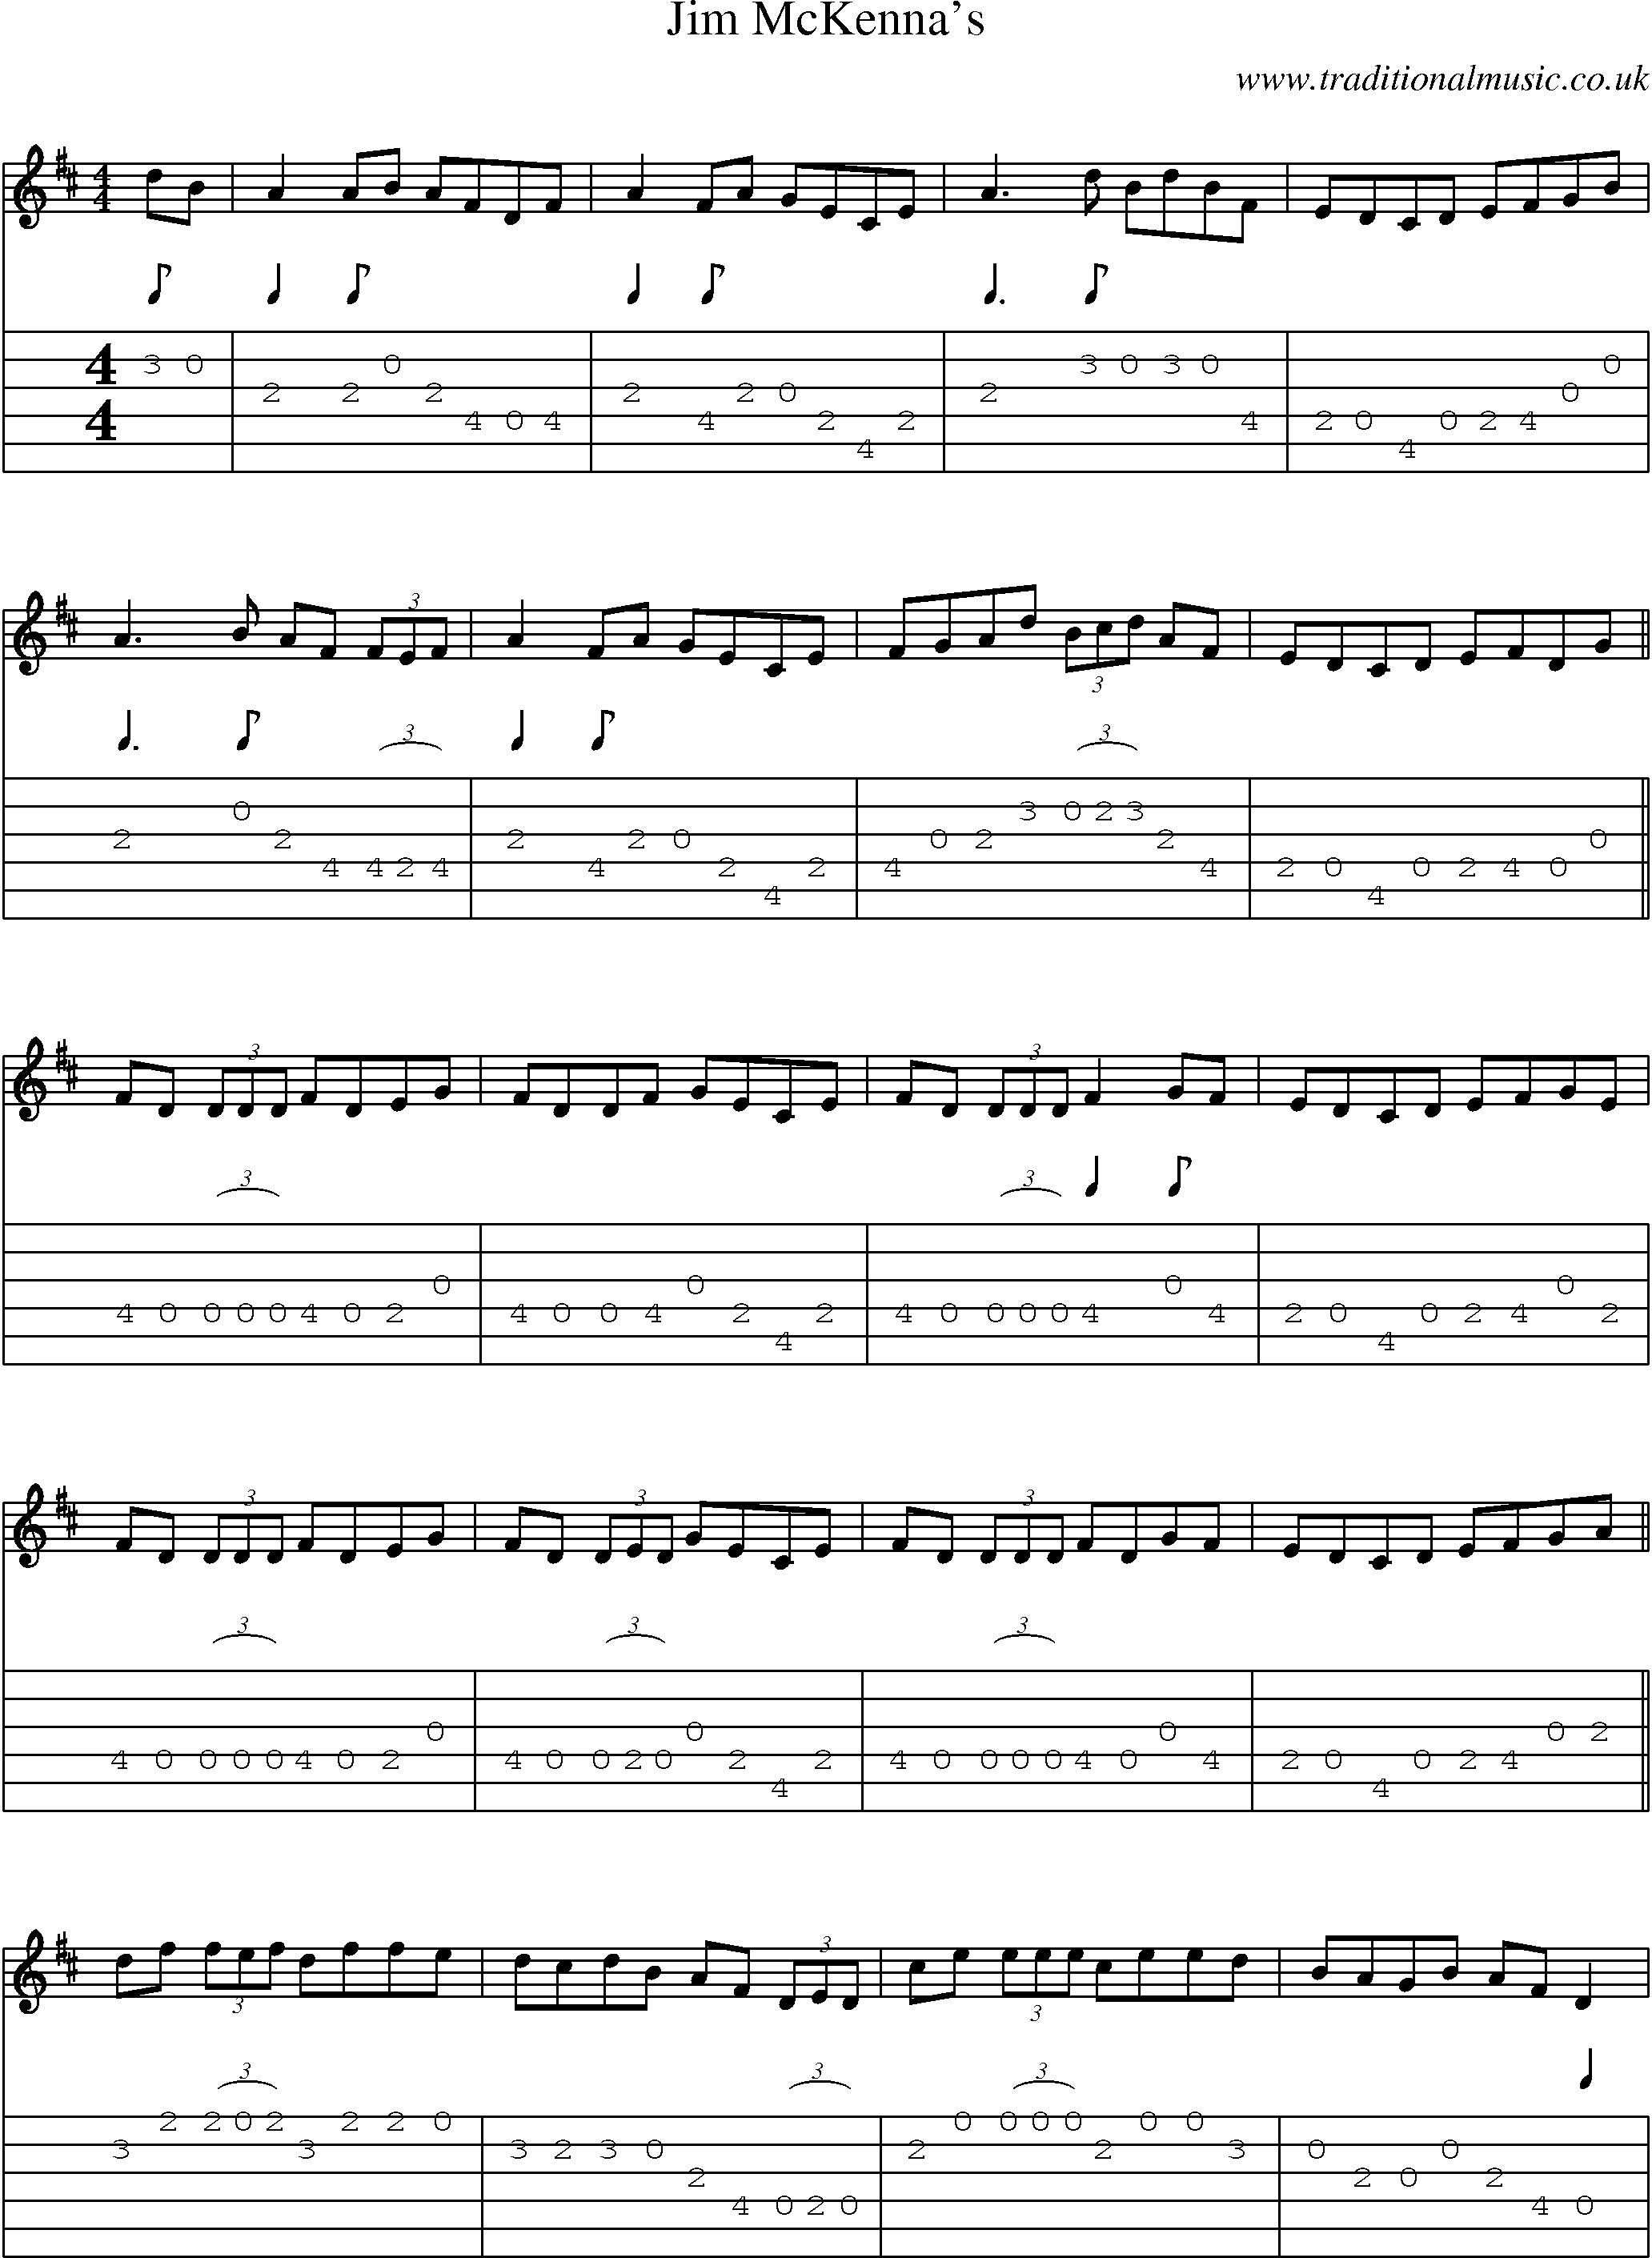 Music Score and Guitar Tabs for Jim Mckennas